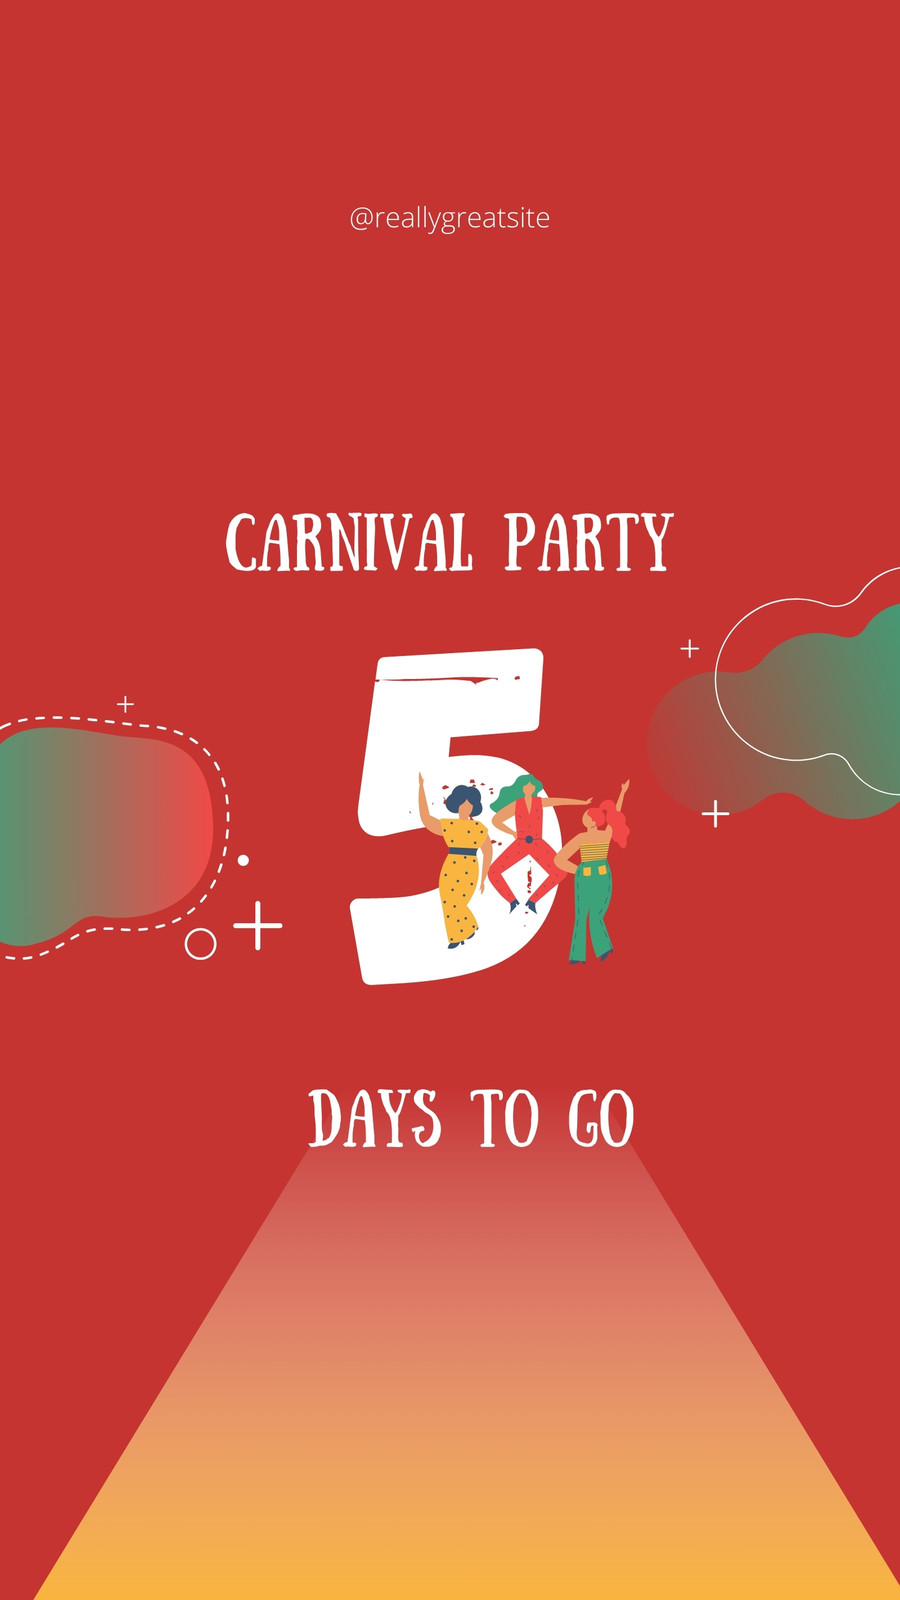 Free and customizable carnival templates